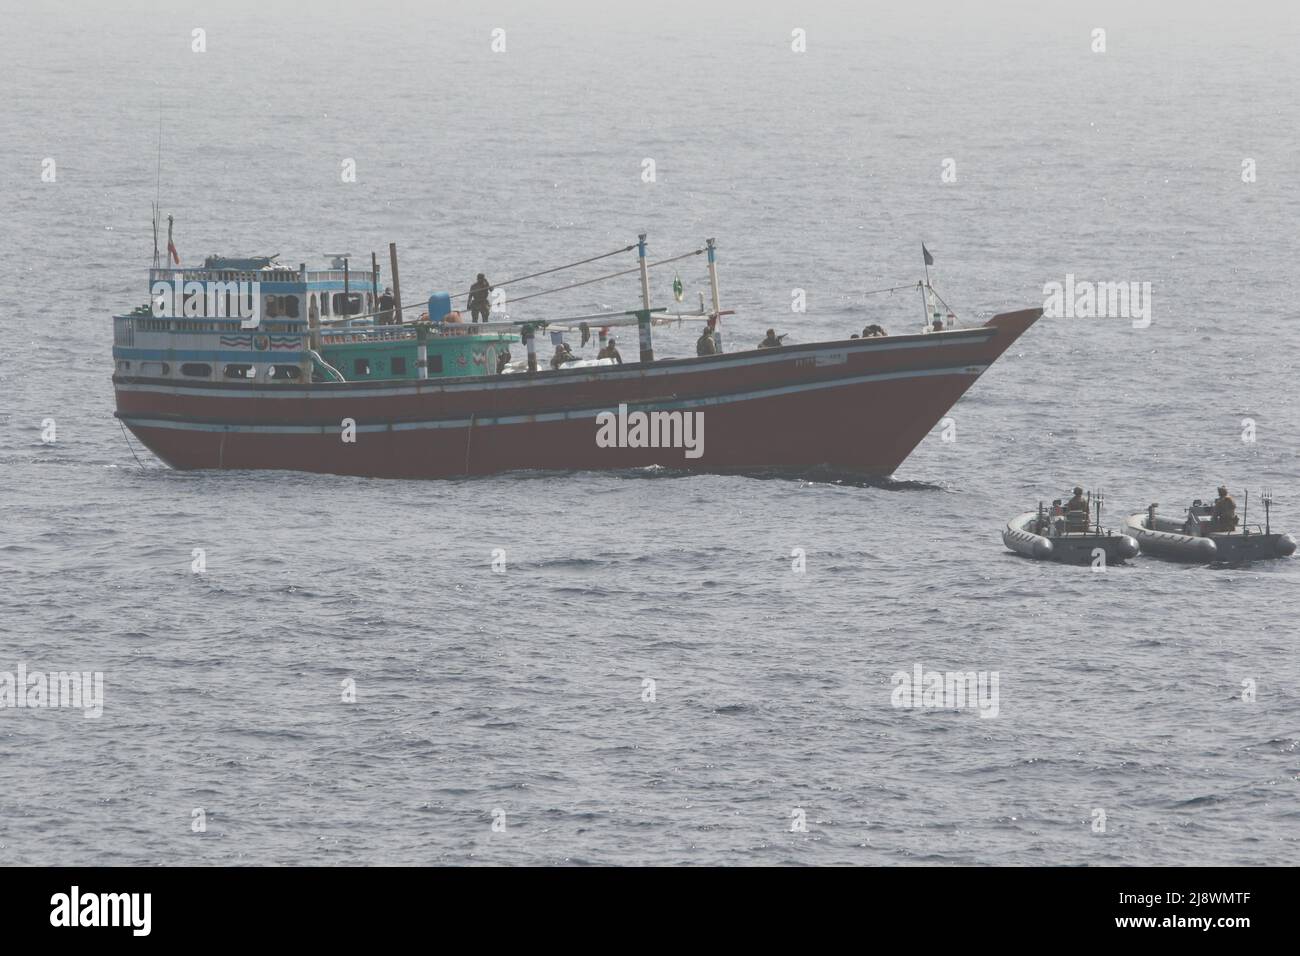 Gulf Of Oman, International Waters. 16th May, 2022. Gulf of Oman, International Waters. 16 May, 2022. A U.S. Navy interdiction team from the guided-missile destroyer USS Momsen boards a fishing vessel carrying illegal narcotics, May 16, 2022 in the Gulf of Oman. The vessel was smuggling $39 million dollars of illegal methamphetamine. Credit: MC3 Lily Gebauer/USCG/Alamy Live News Stock Photo